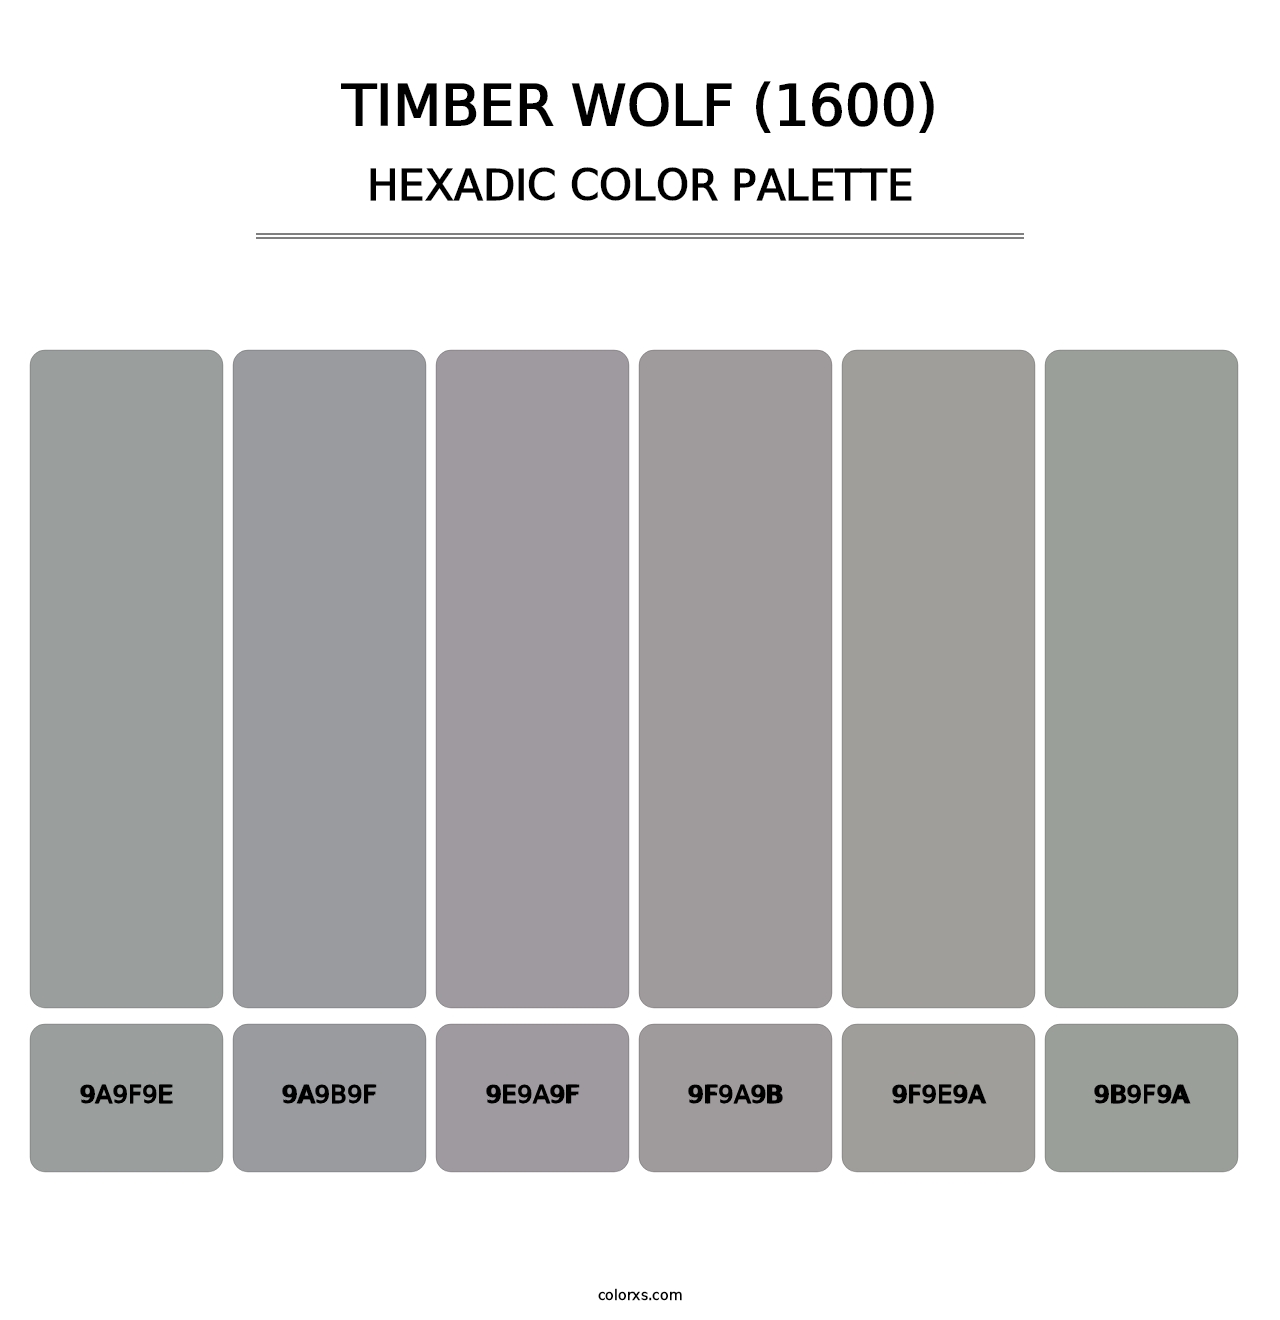 Timber Wolf (1600) - Hexadic Color Palette